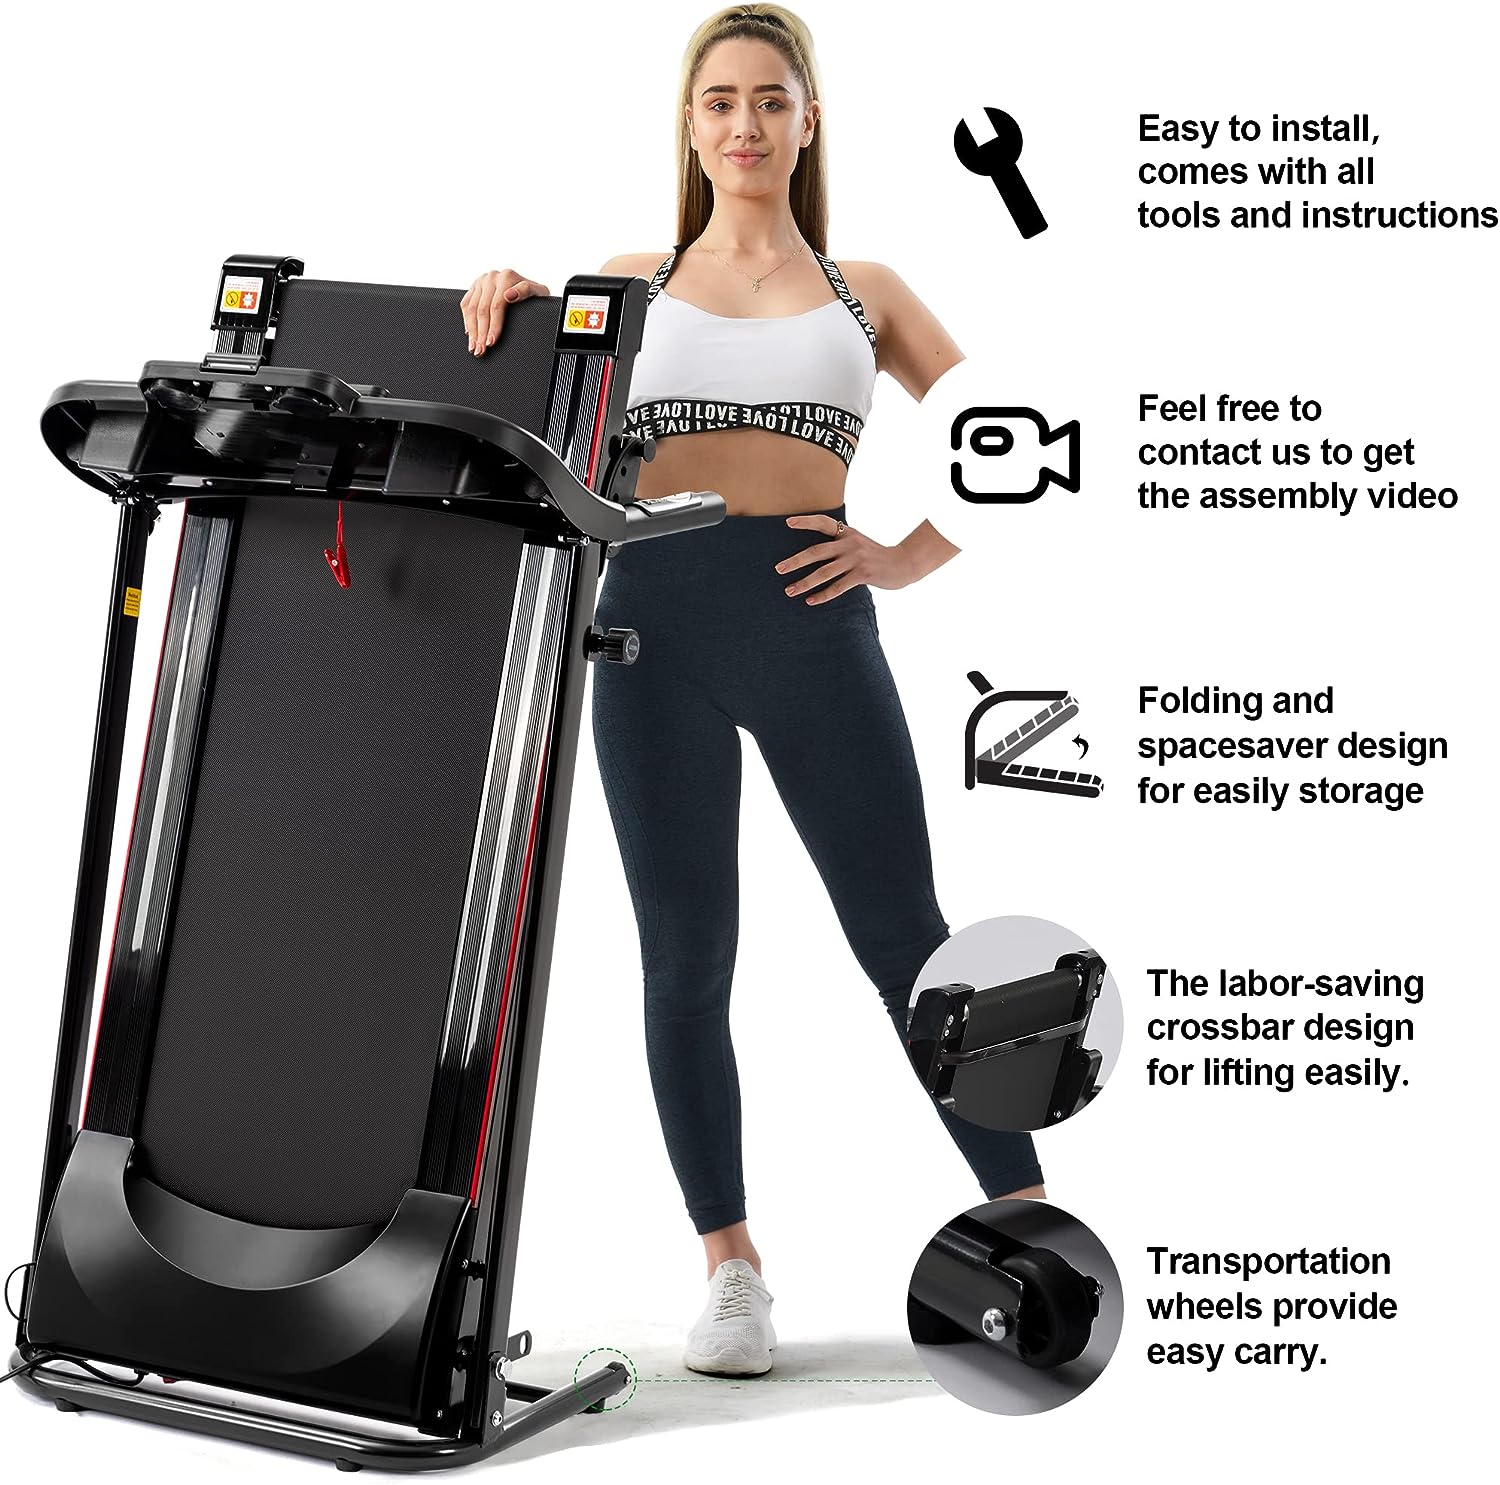 Electric Folding Treadmill, Folding Treadmills for Home with Bluetooth and Incline, 2.5HP Portable Treadmill with 12 Preset Programs, Treadmills Foldable for Indoor Home Gym Exercise Fitness